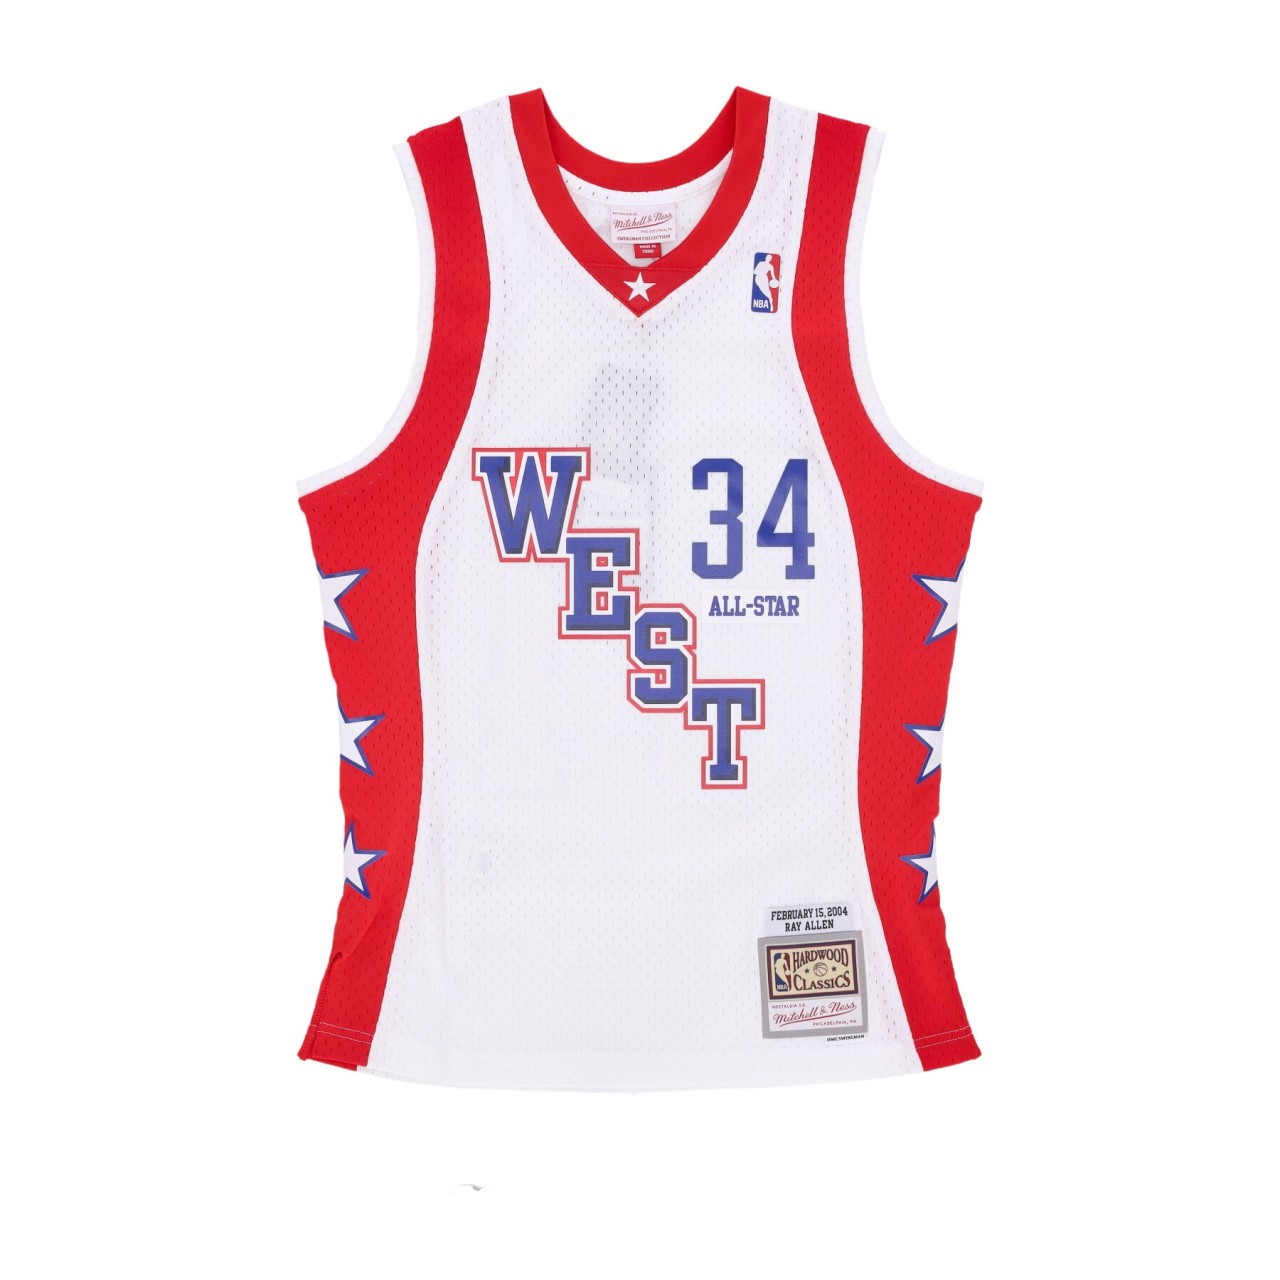 MITCHELL & NESS NBA WHITE JERSEY ALL STAR 2004 NO 34 RAY ALLEN TEAM WEST SMJY7086-ASW04RALWHIT